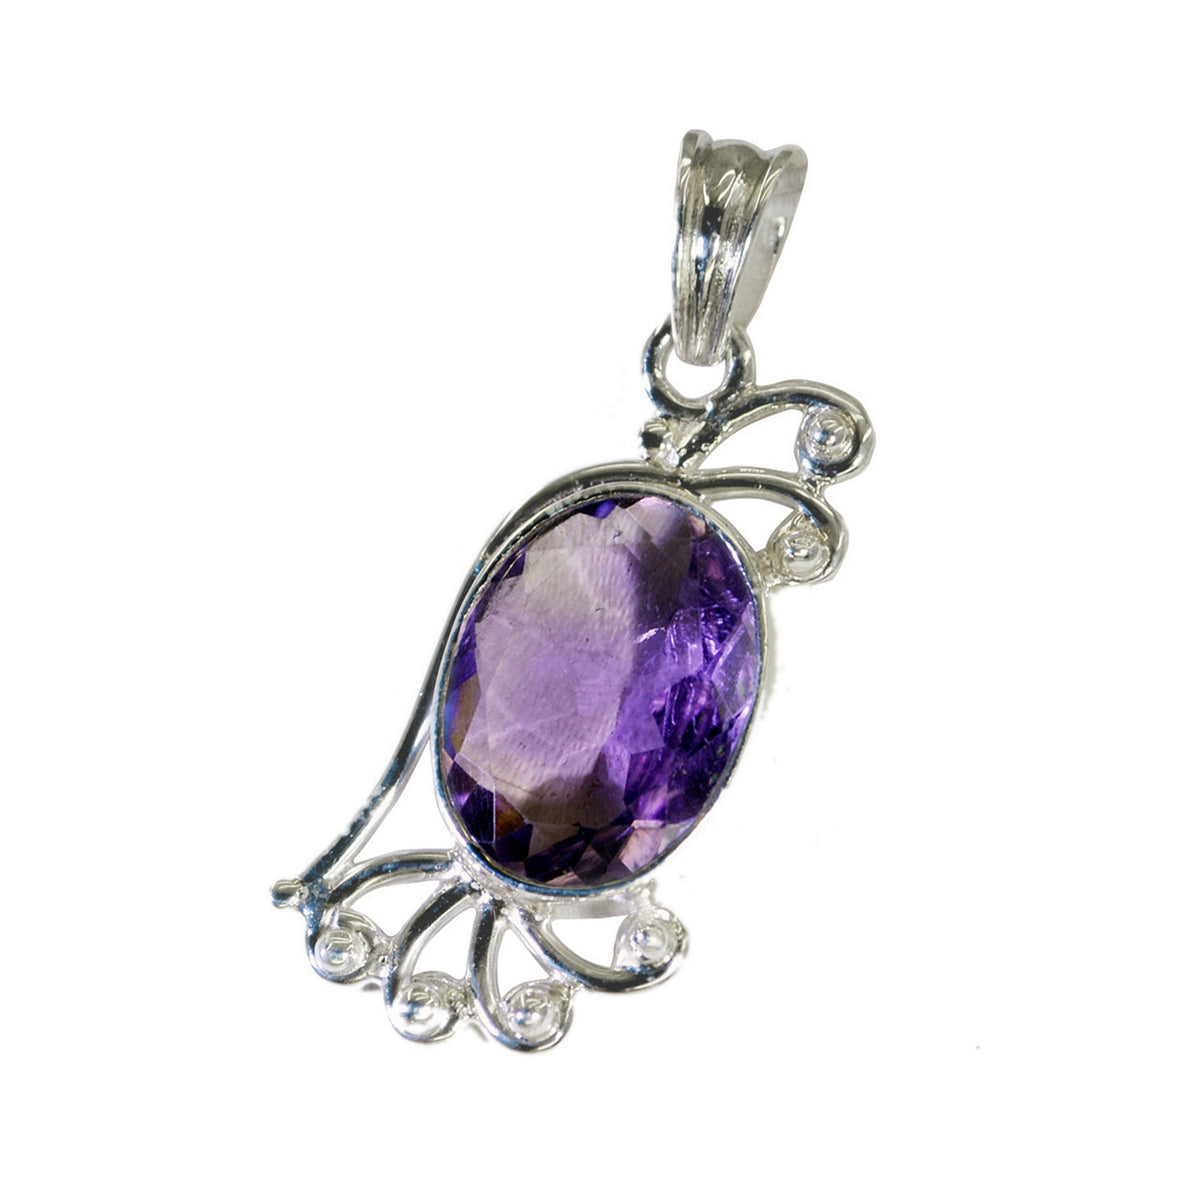 Riyo Aesthetic Gemstone Oval Faceted Purple Amethyst 955 Sterling Silver Pendant Gift For Teachers Day